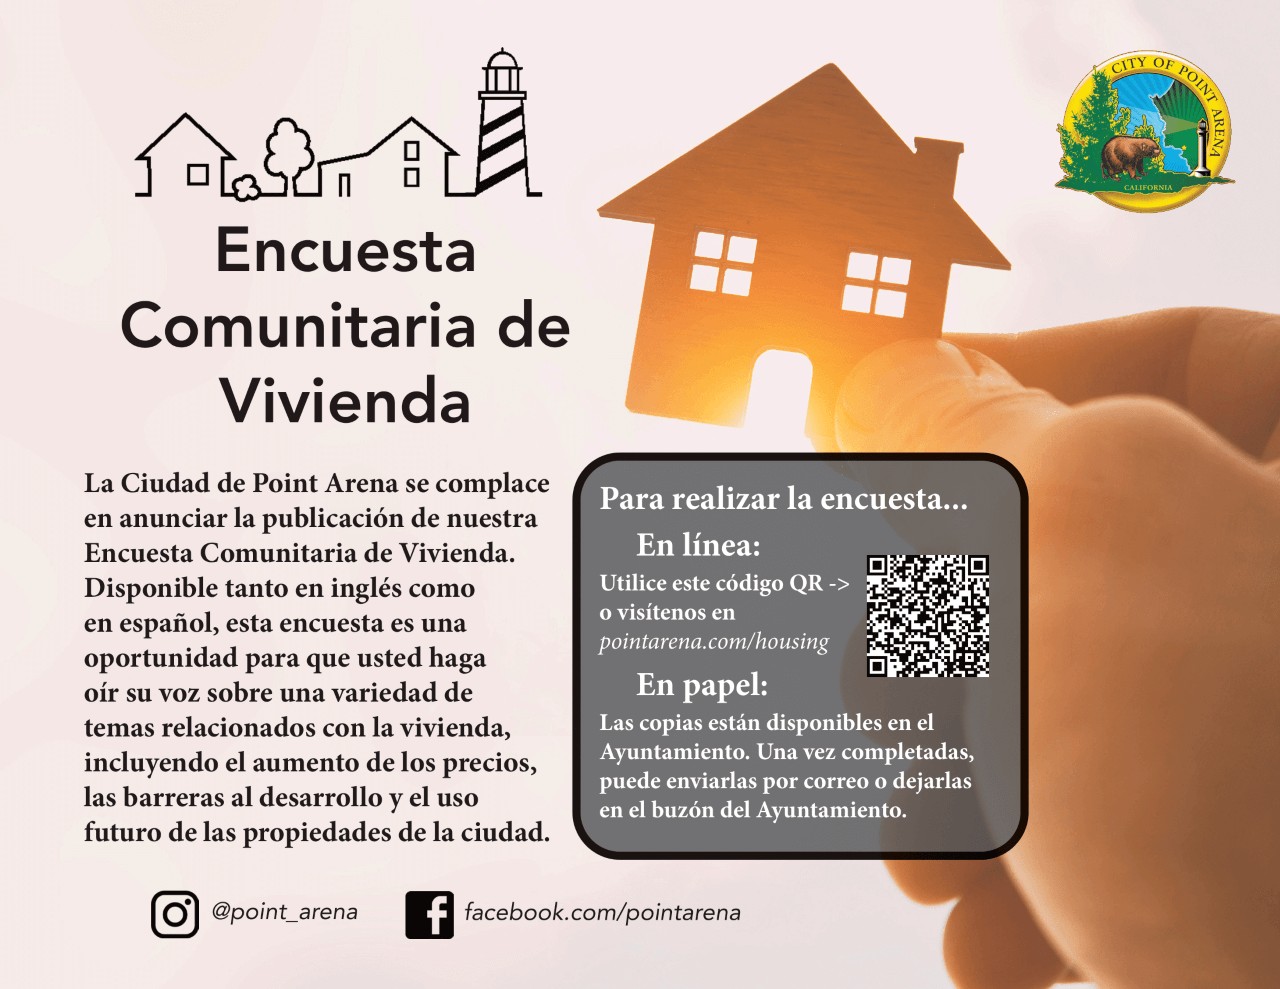 Spanish Flyer Survey displays a small house. QCR code included. From City of Point Arena.